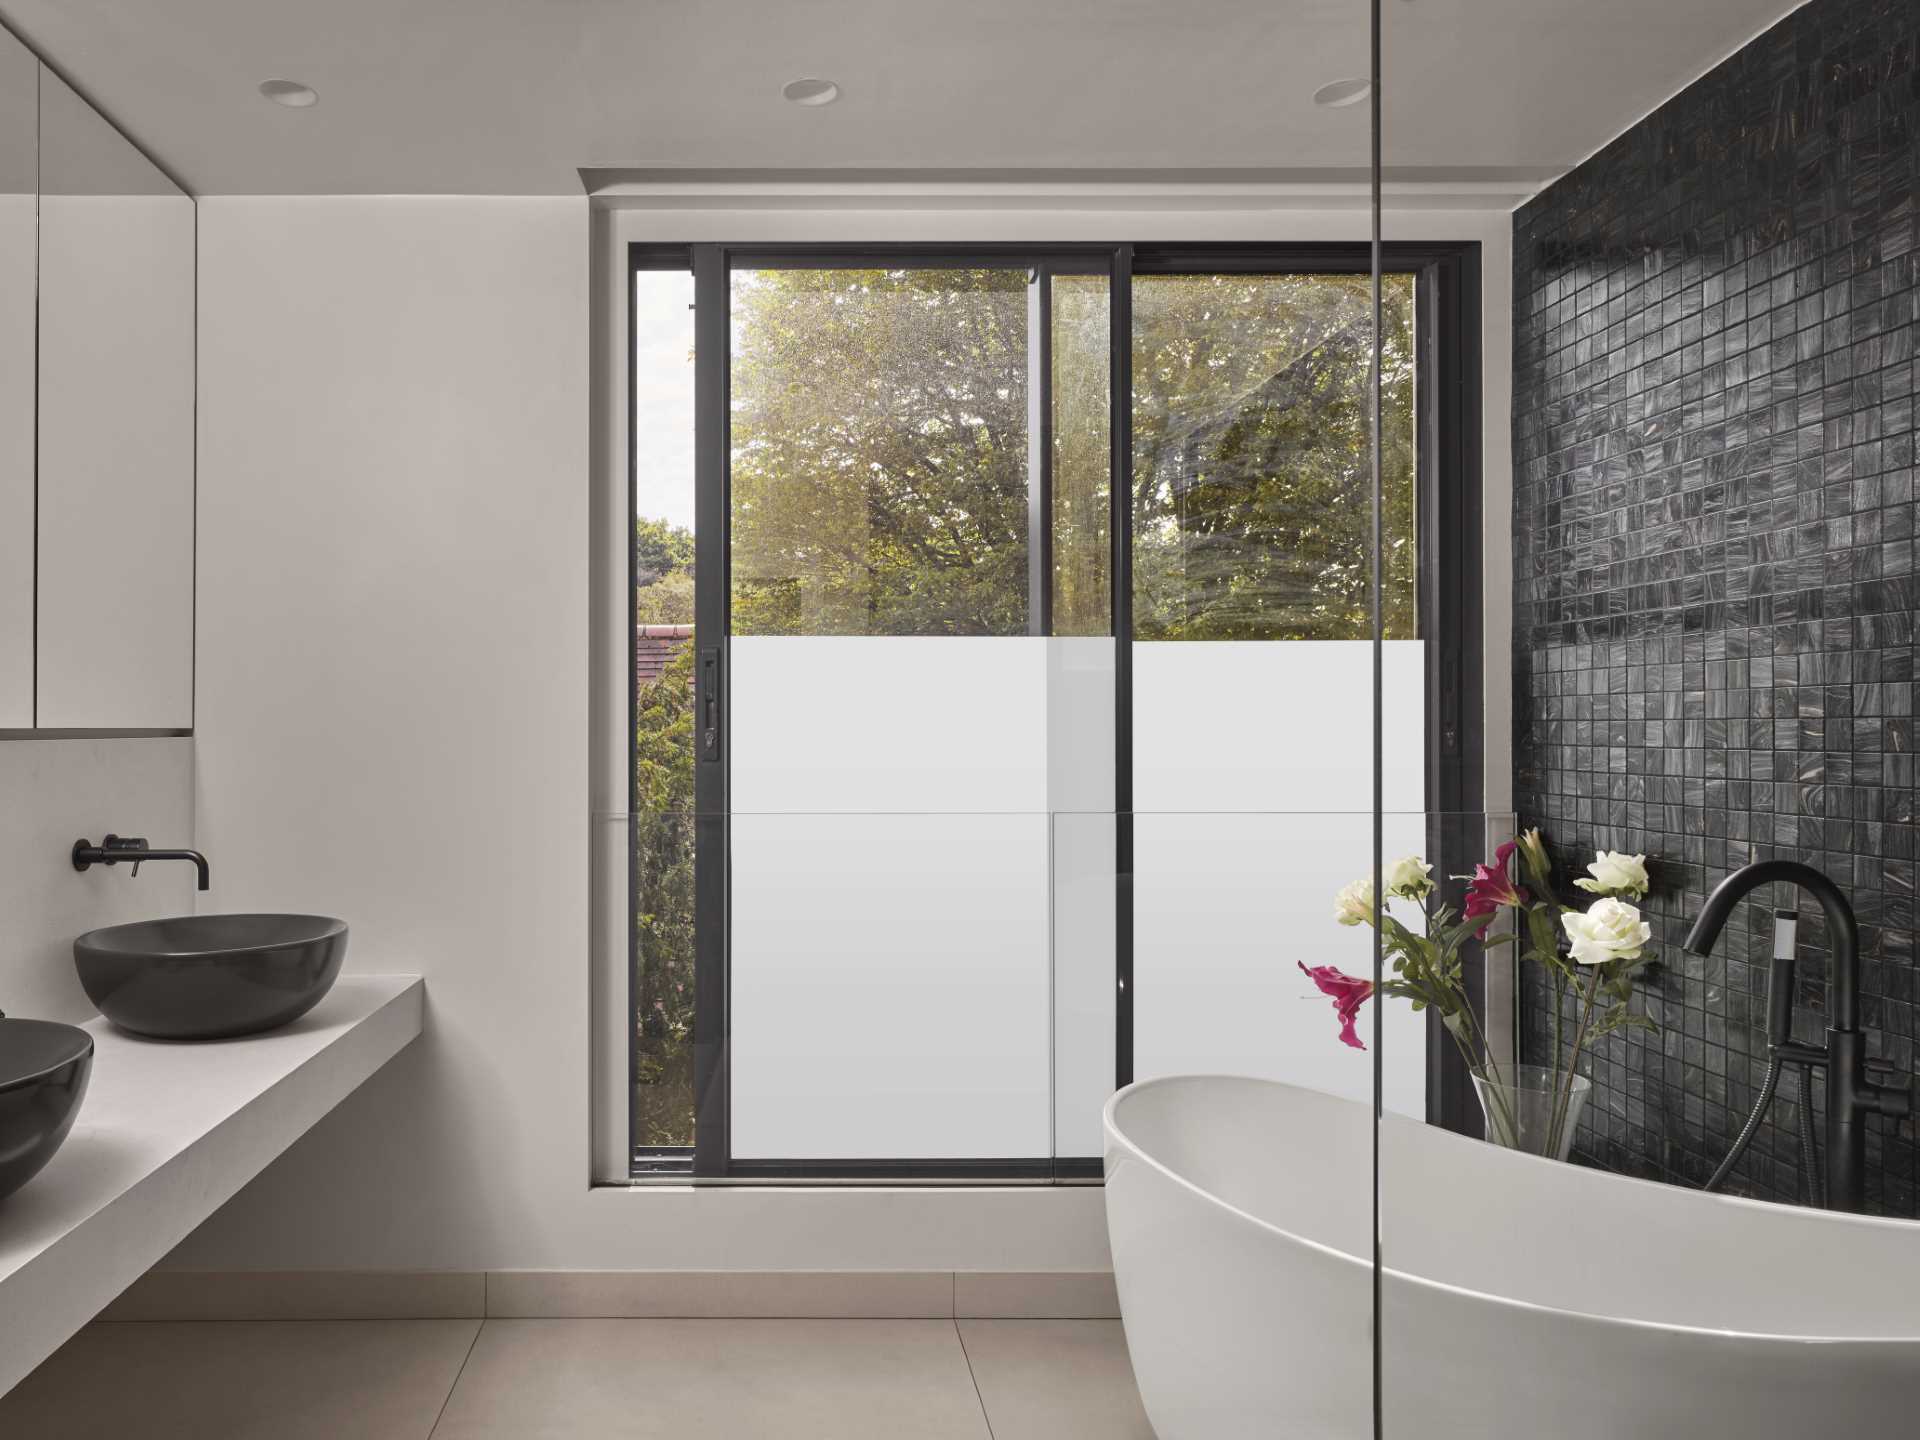 A modern bathroom includes a double vanity, a freestanding bathtub, and a black tile mosaic on the wall.